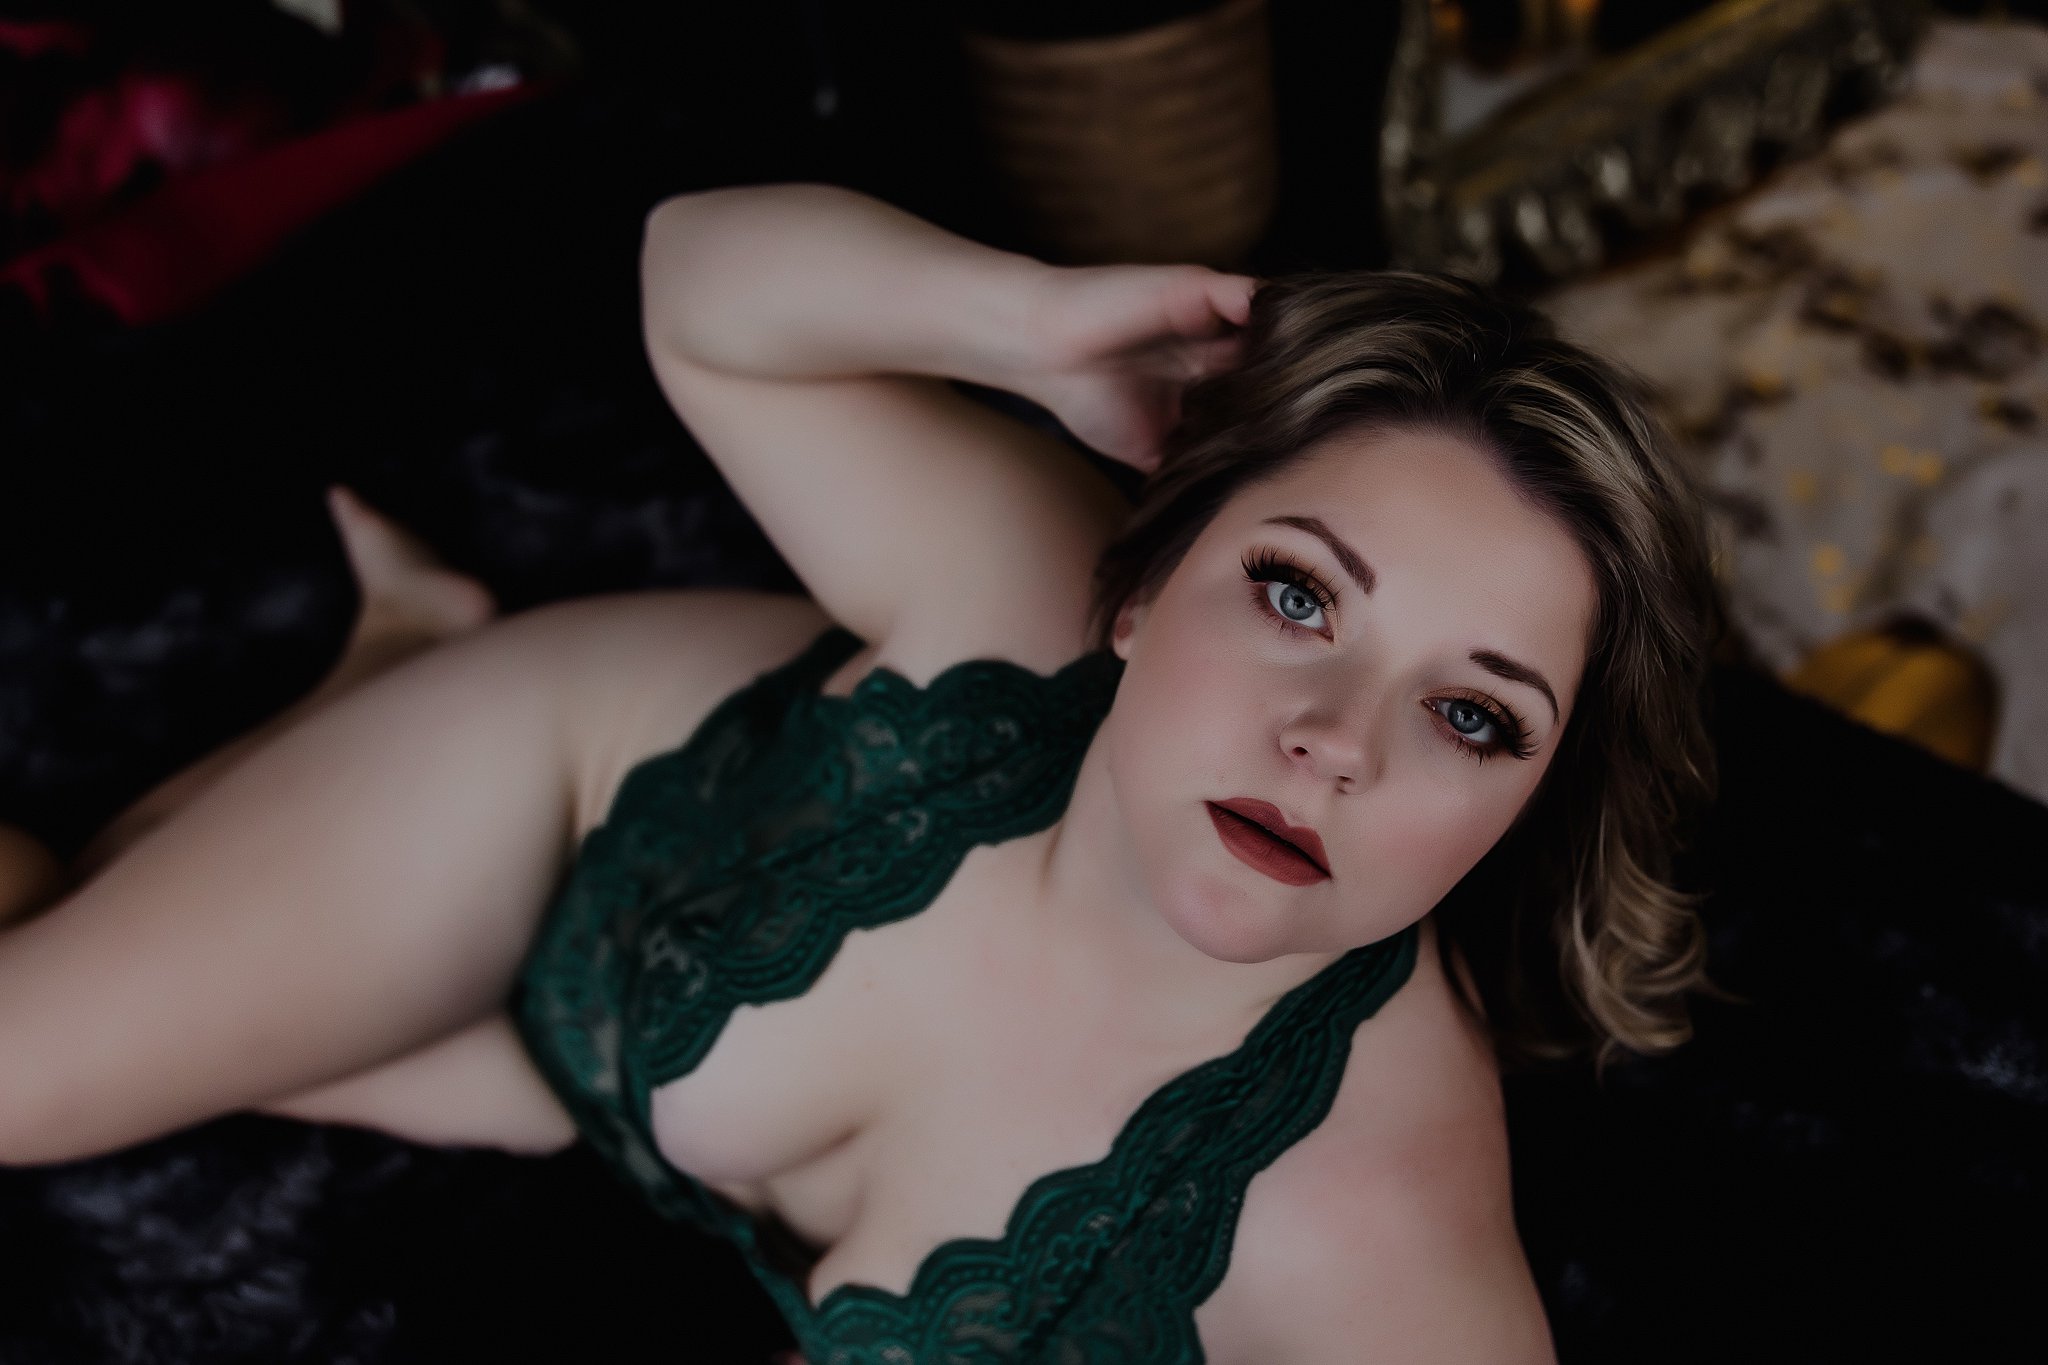 women in green lingerie on bed with big eyes